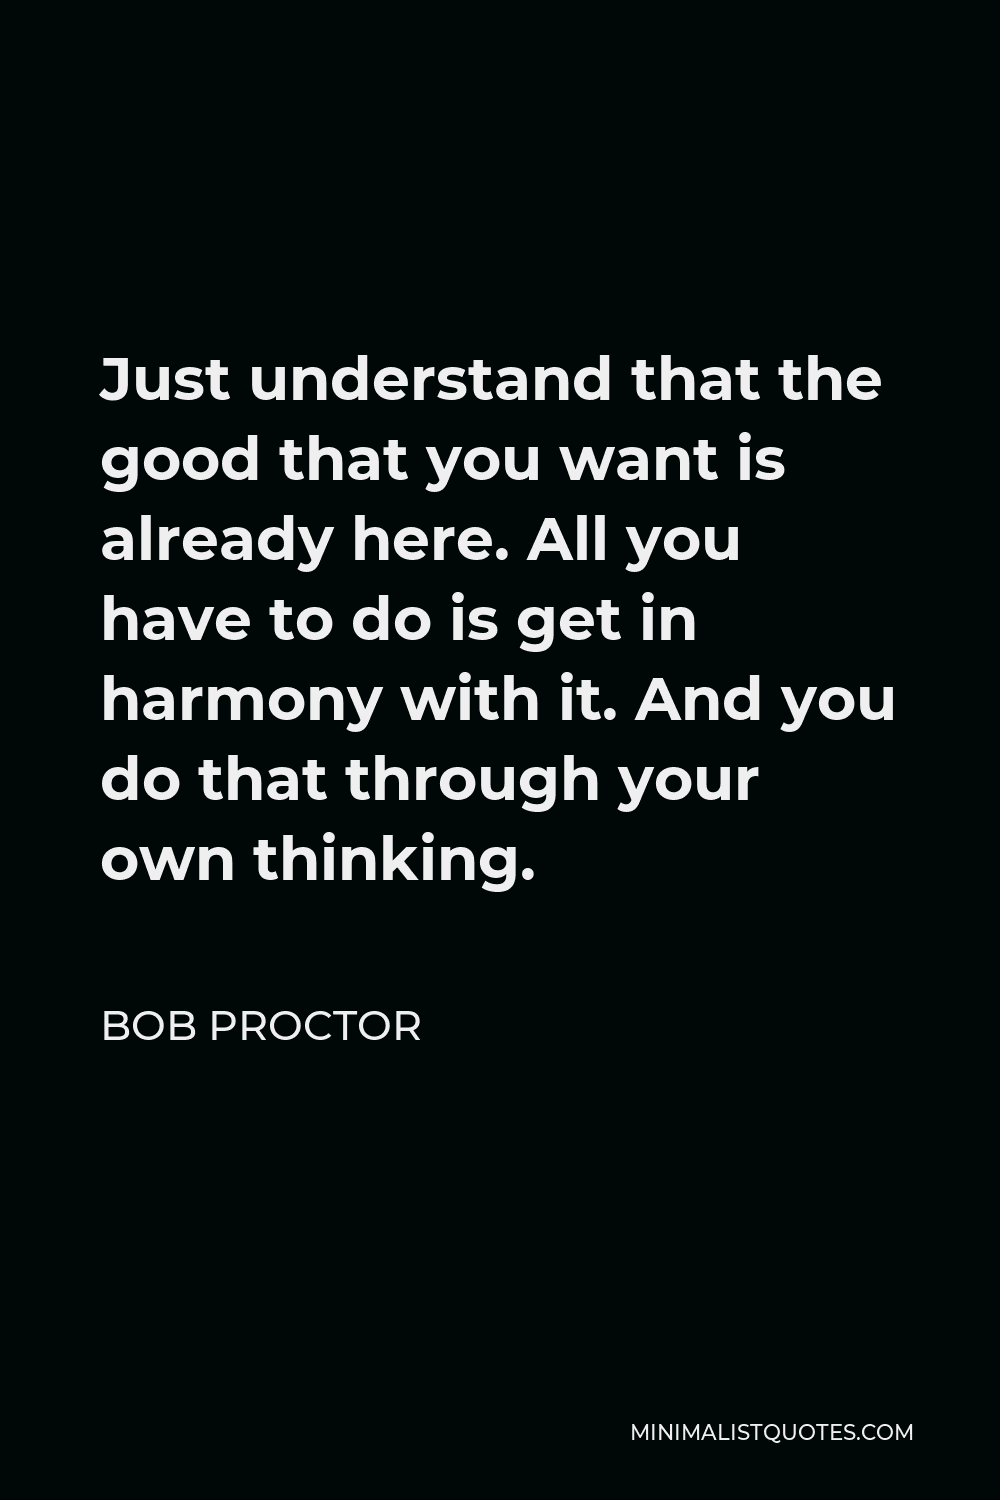 Bob Proctor Quote - Just understand that the good that you want is already here. All you have to do is get in harmony with it. And you do that through your own thinking.